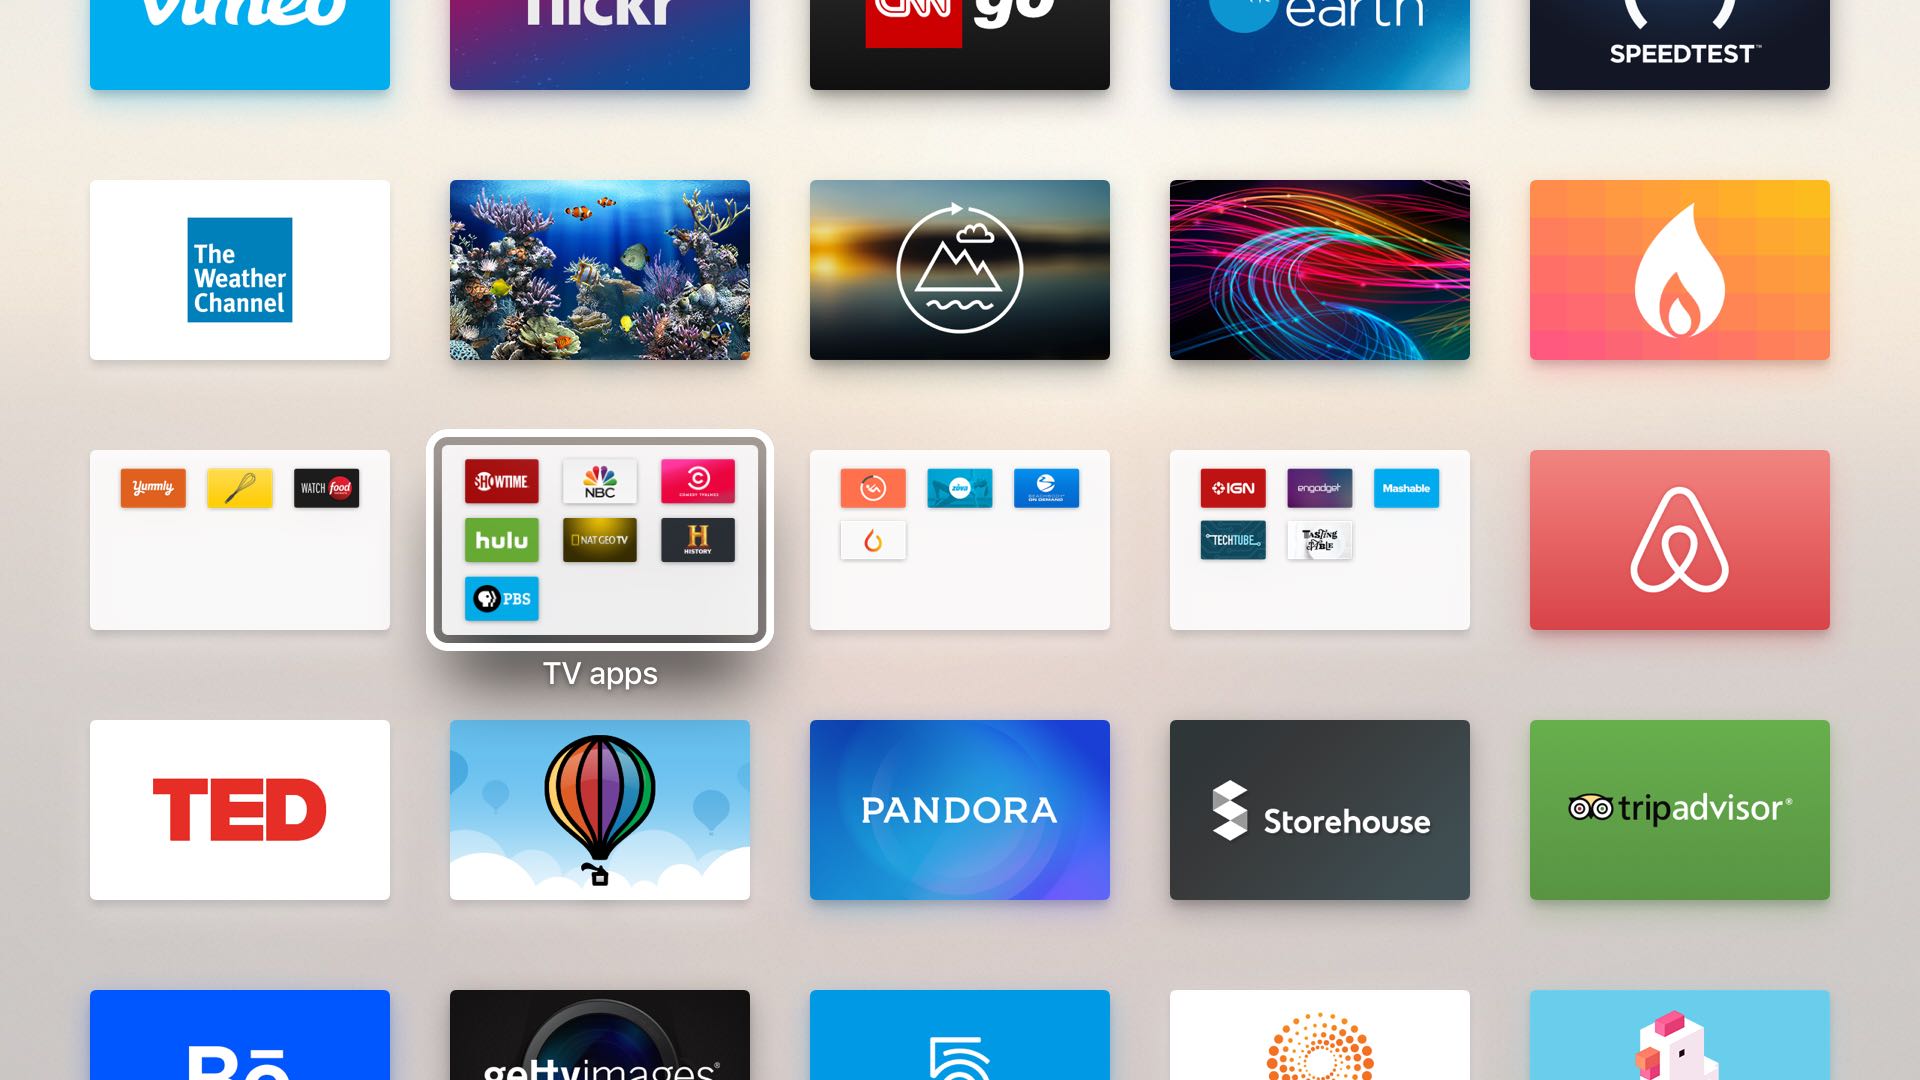 Tips for creating, renaming and using folders on the new Apple TV